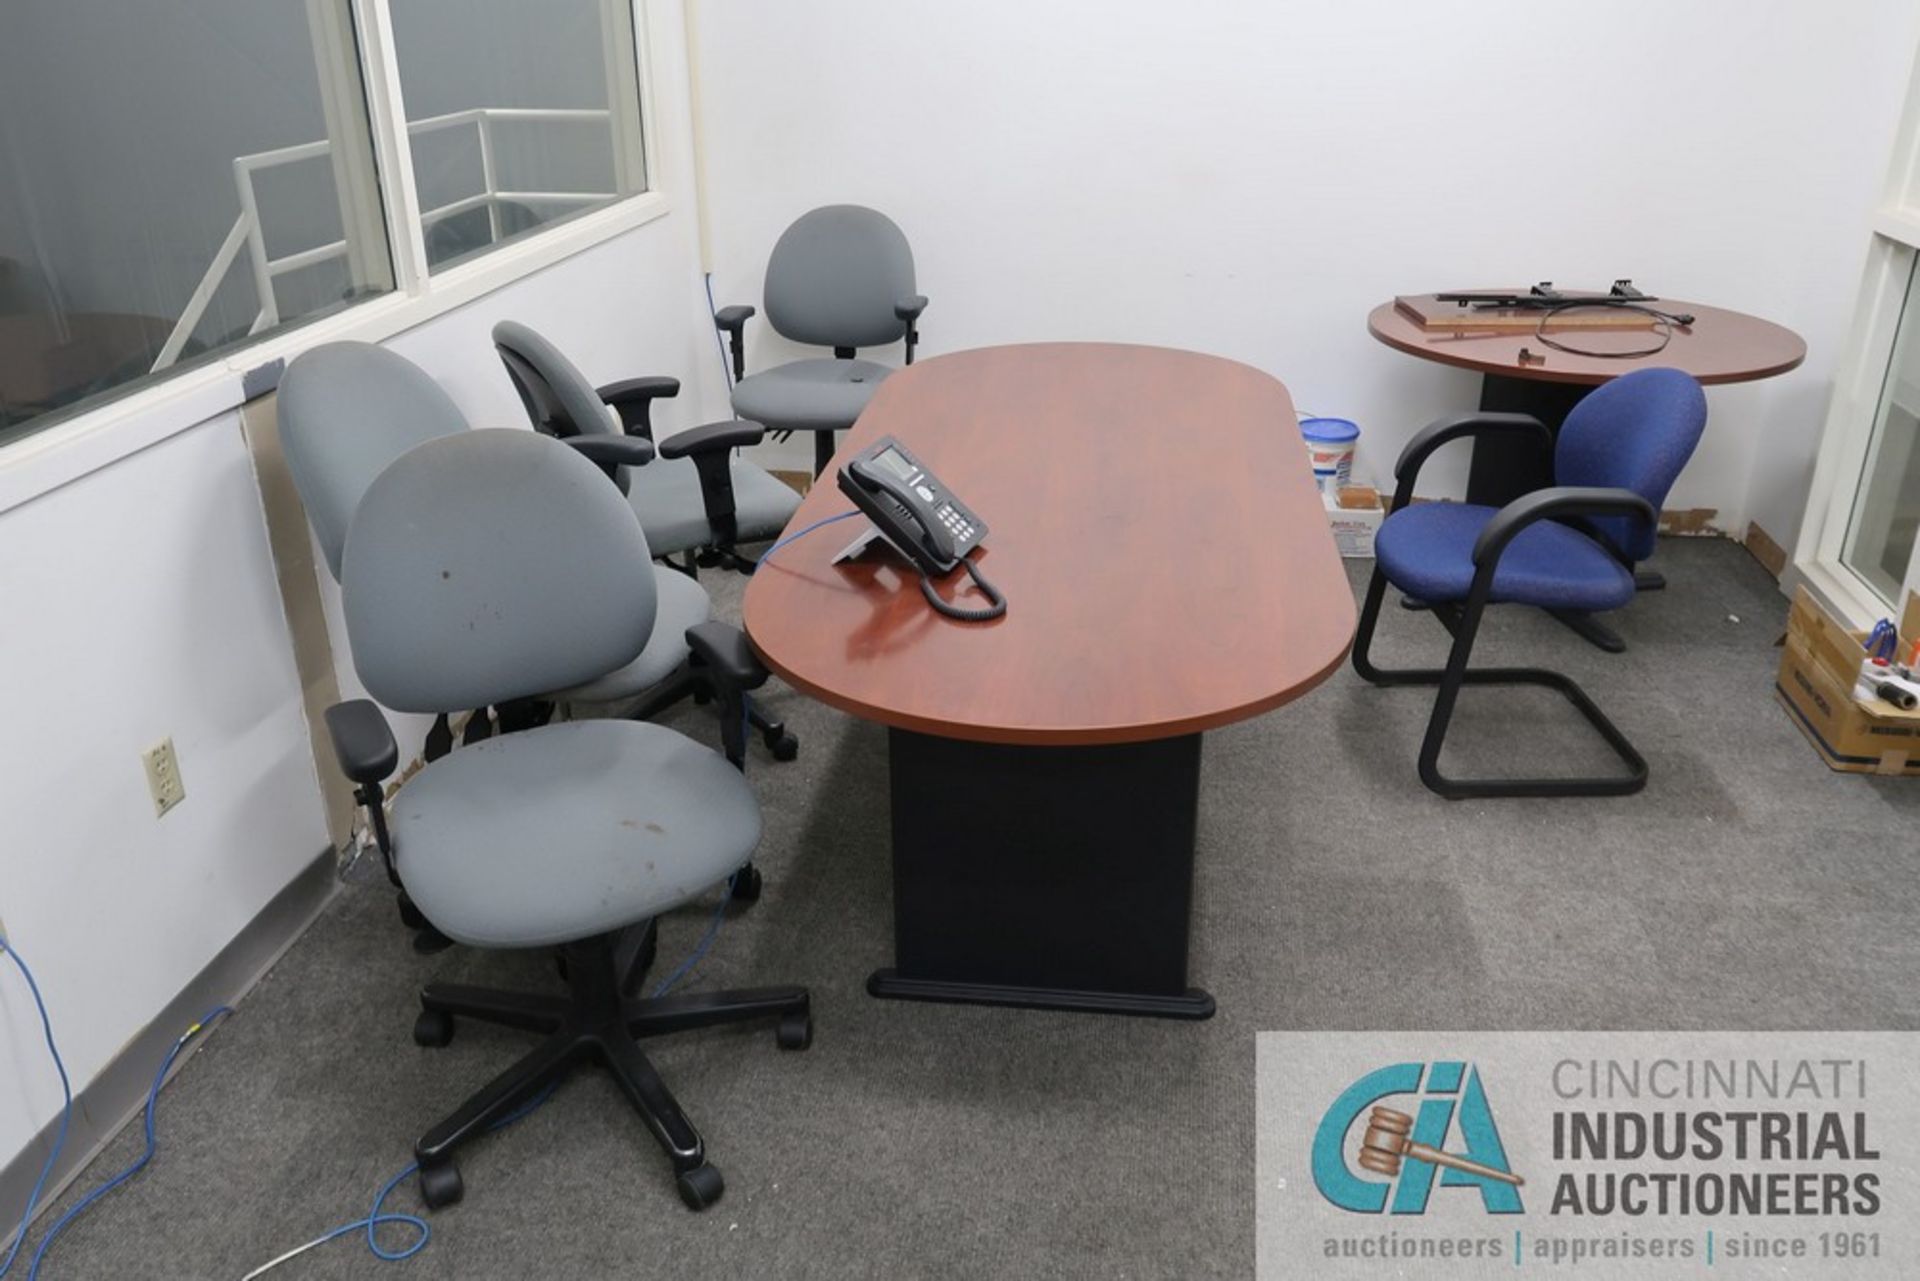 (LOT) CONTENTS OF OFFICE INCLUDING 7' CONFERENCE TABLE, 42" DIAMETER TABLE, (7) CHAIRS, 4-DRAWER